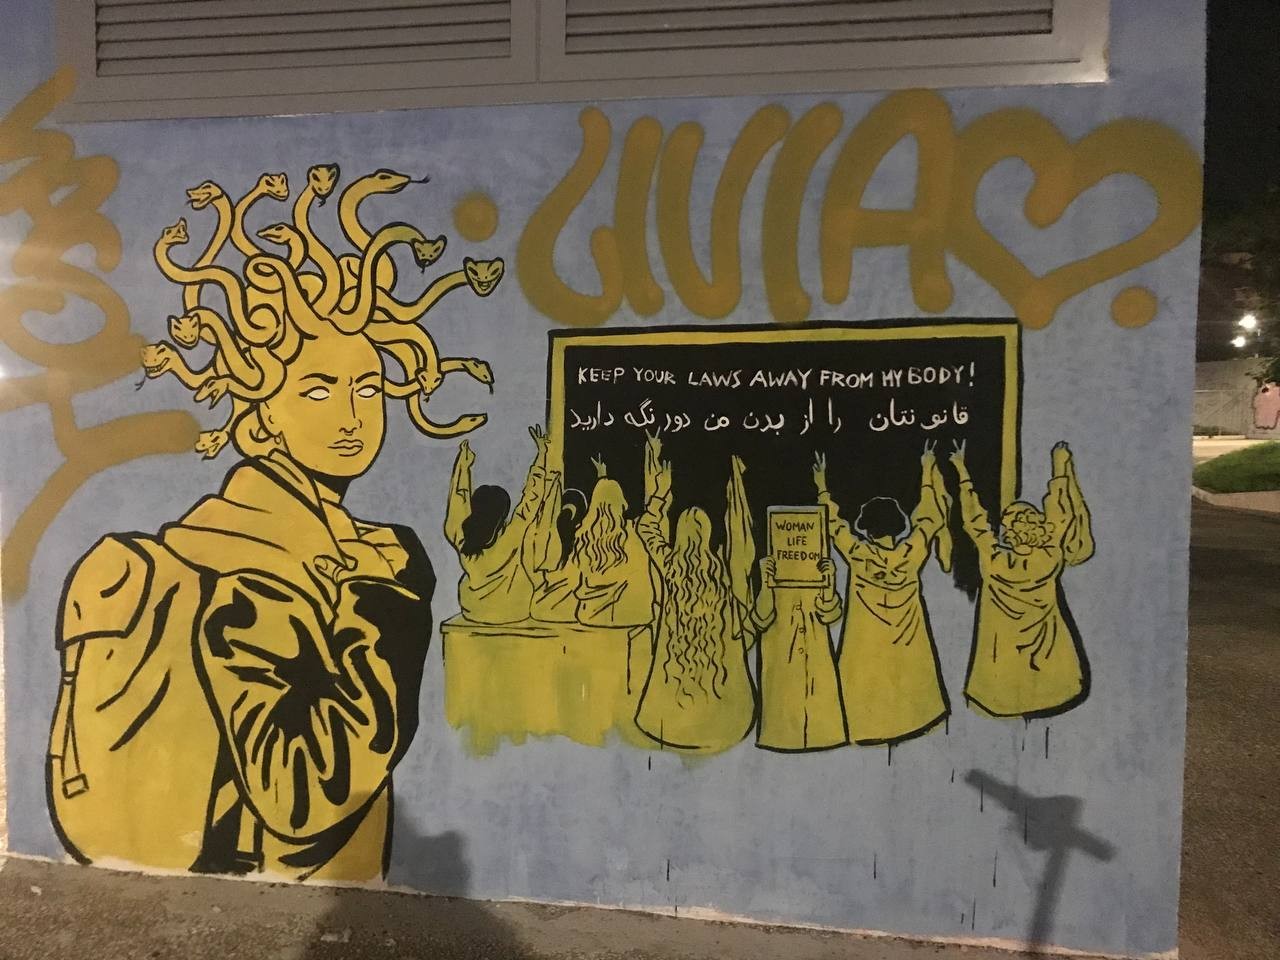 Street Art Depicts a schoolgirl with medusa snake hairs on the left of the frame. On the right is the recreation of a famous schoolgirls picture in a classroom without hijab, holding their hands out with peace signs. On the Classroom blackboard is written <br />"Keep your laws away from my Body" in English & Persian.